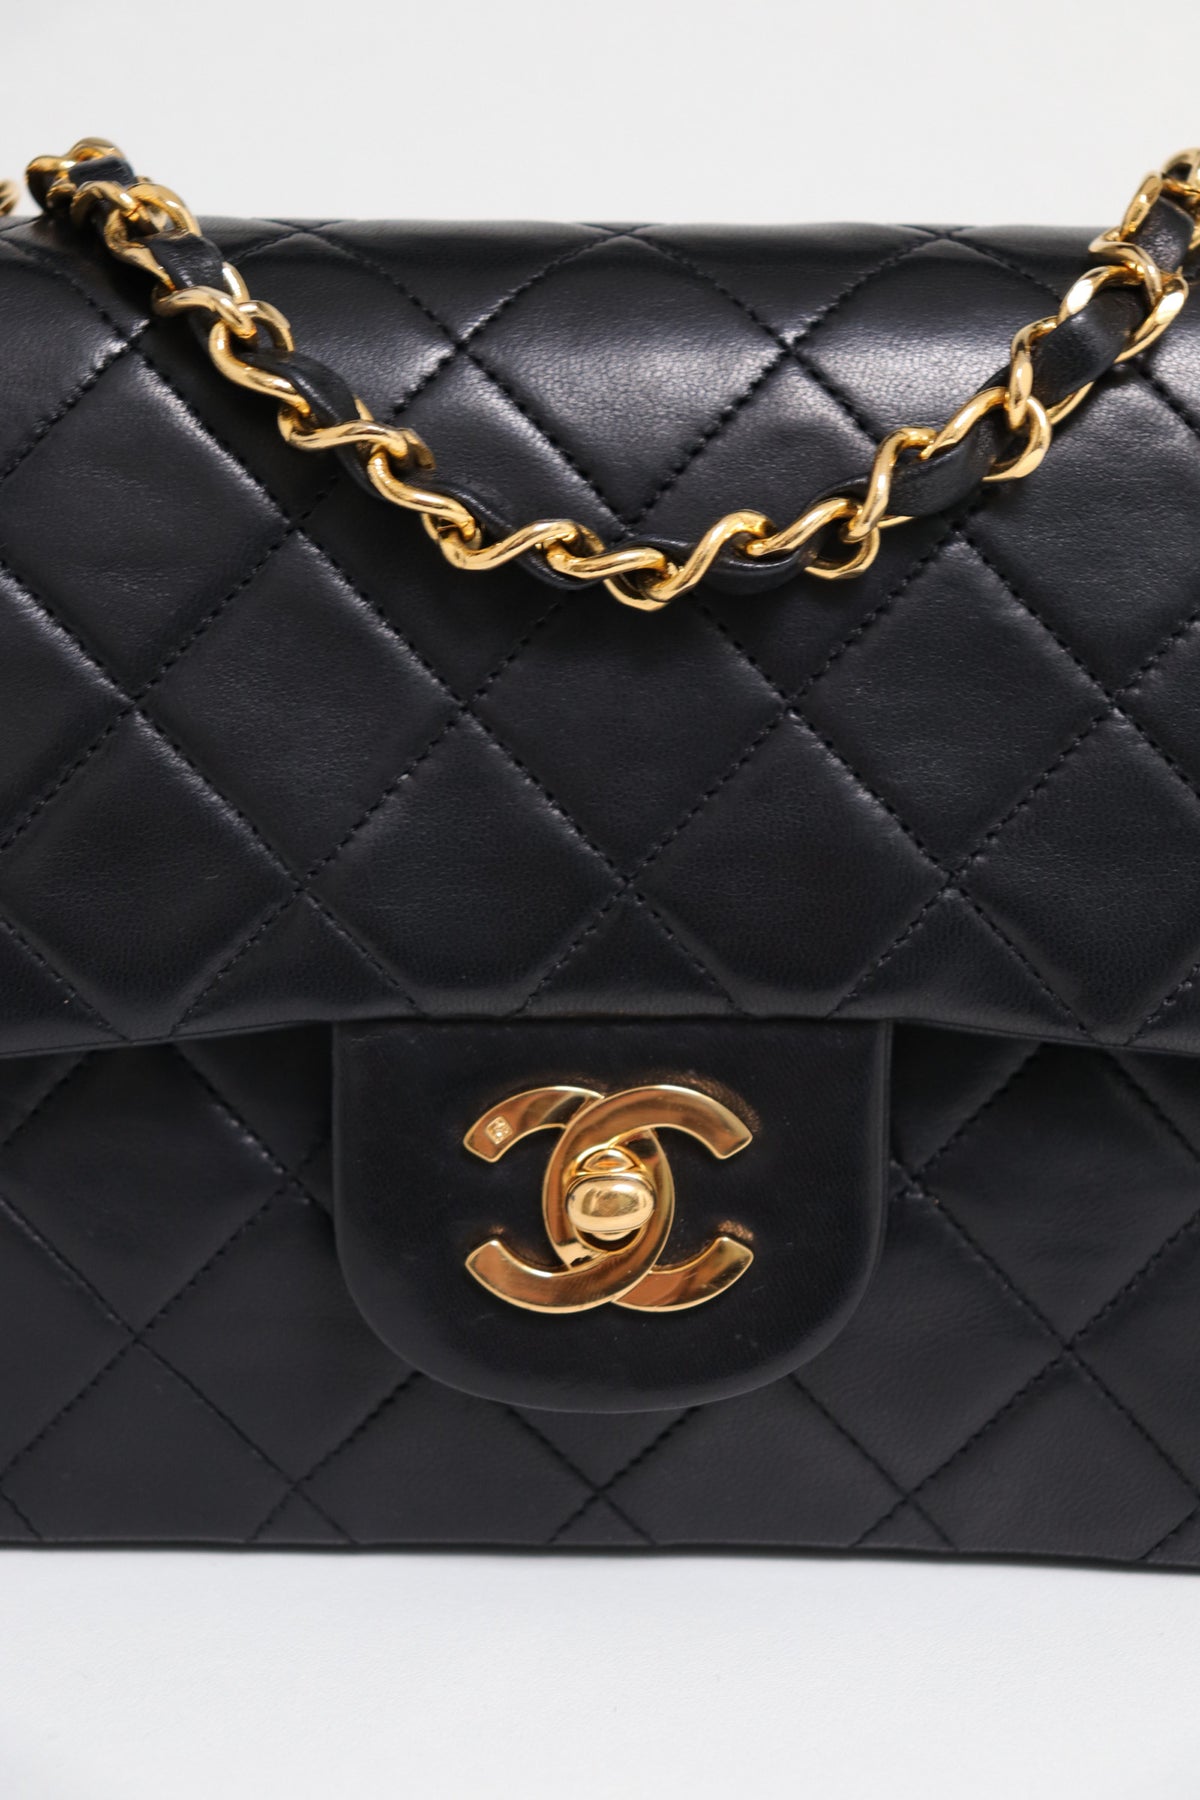 Chanel Timeless Double Flap Minimal Collective